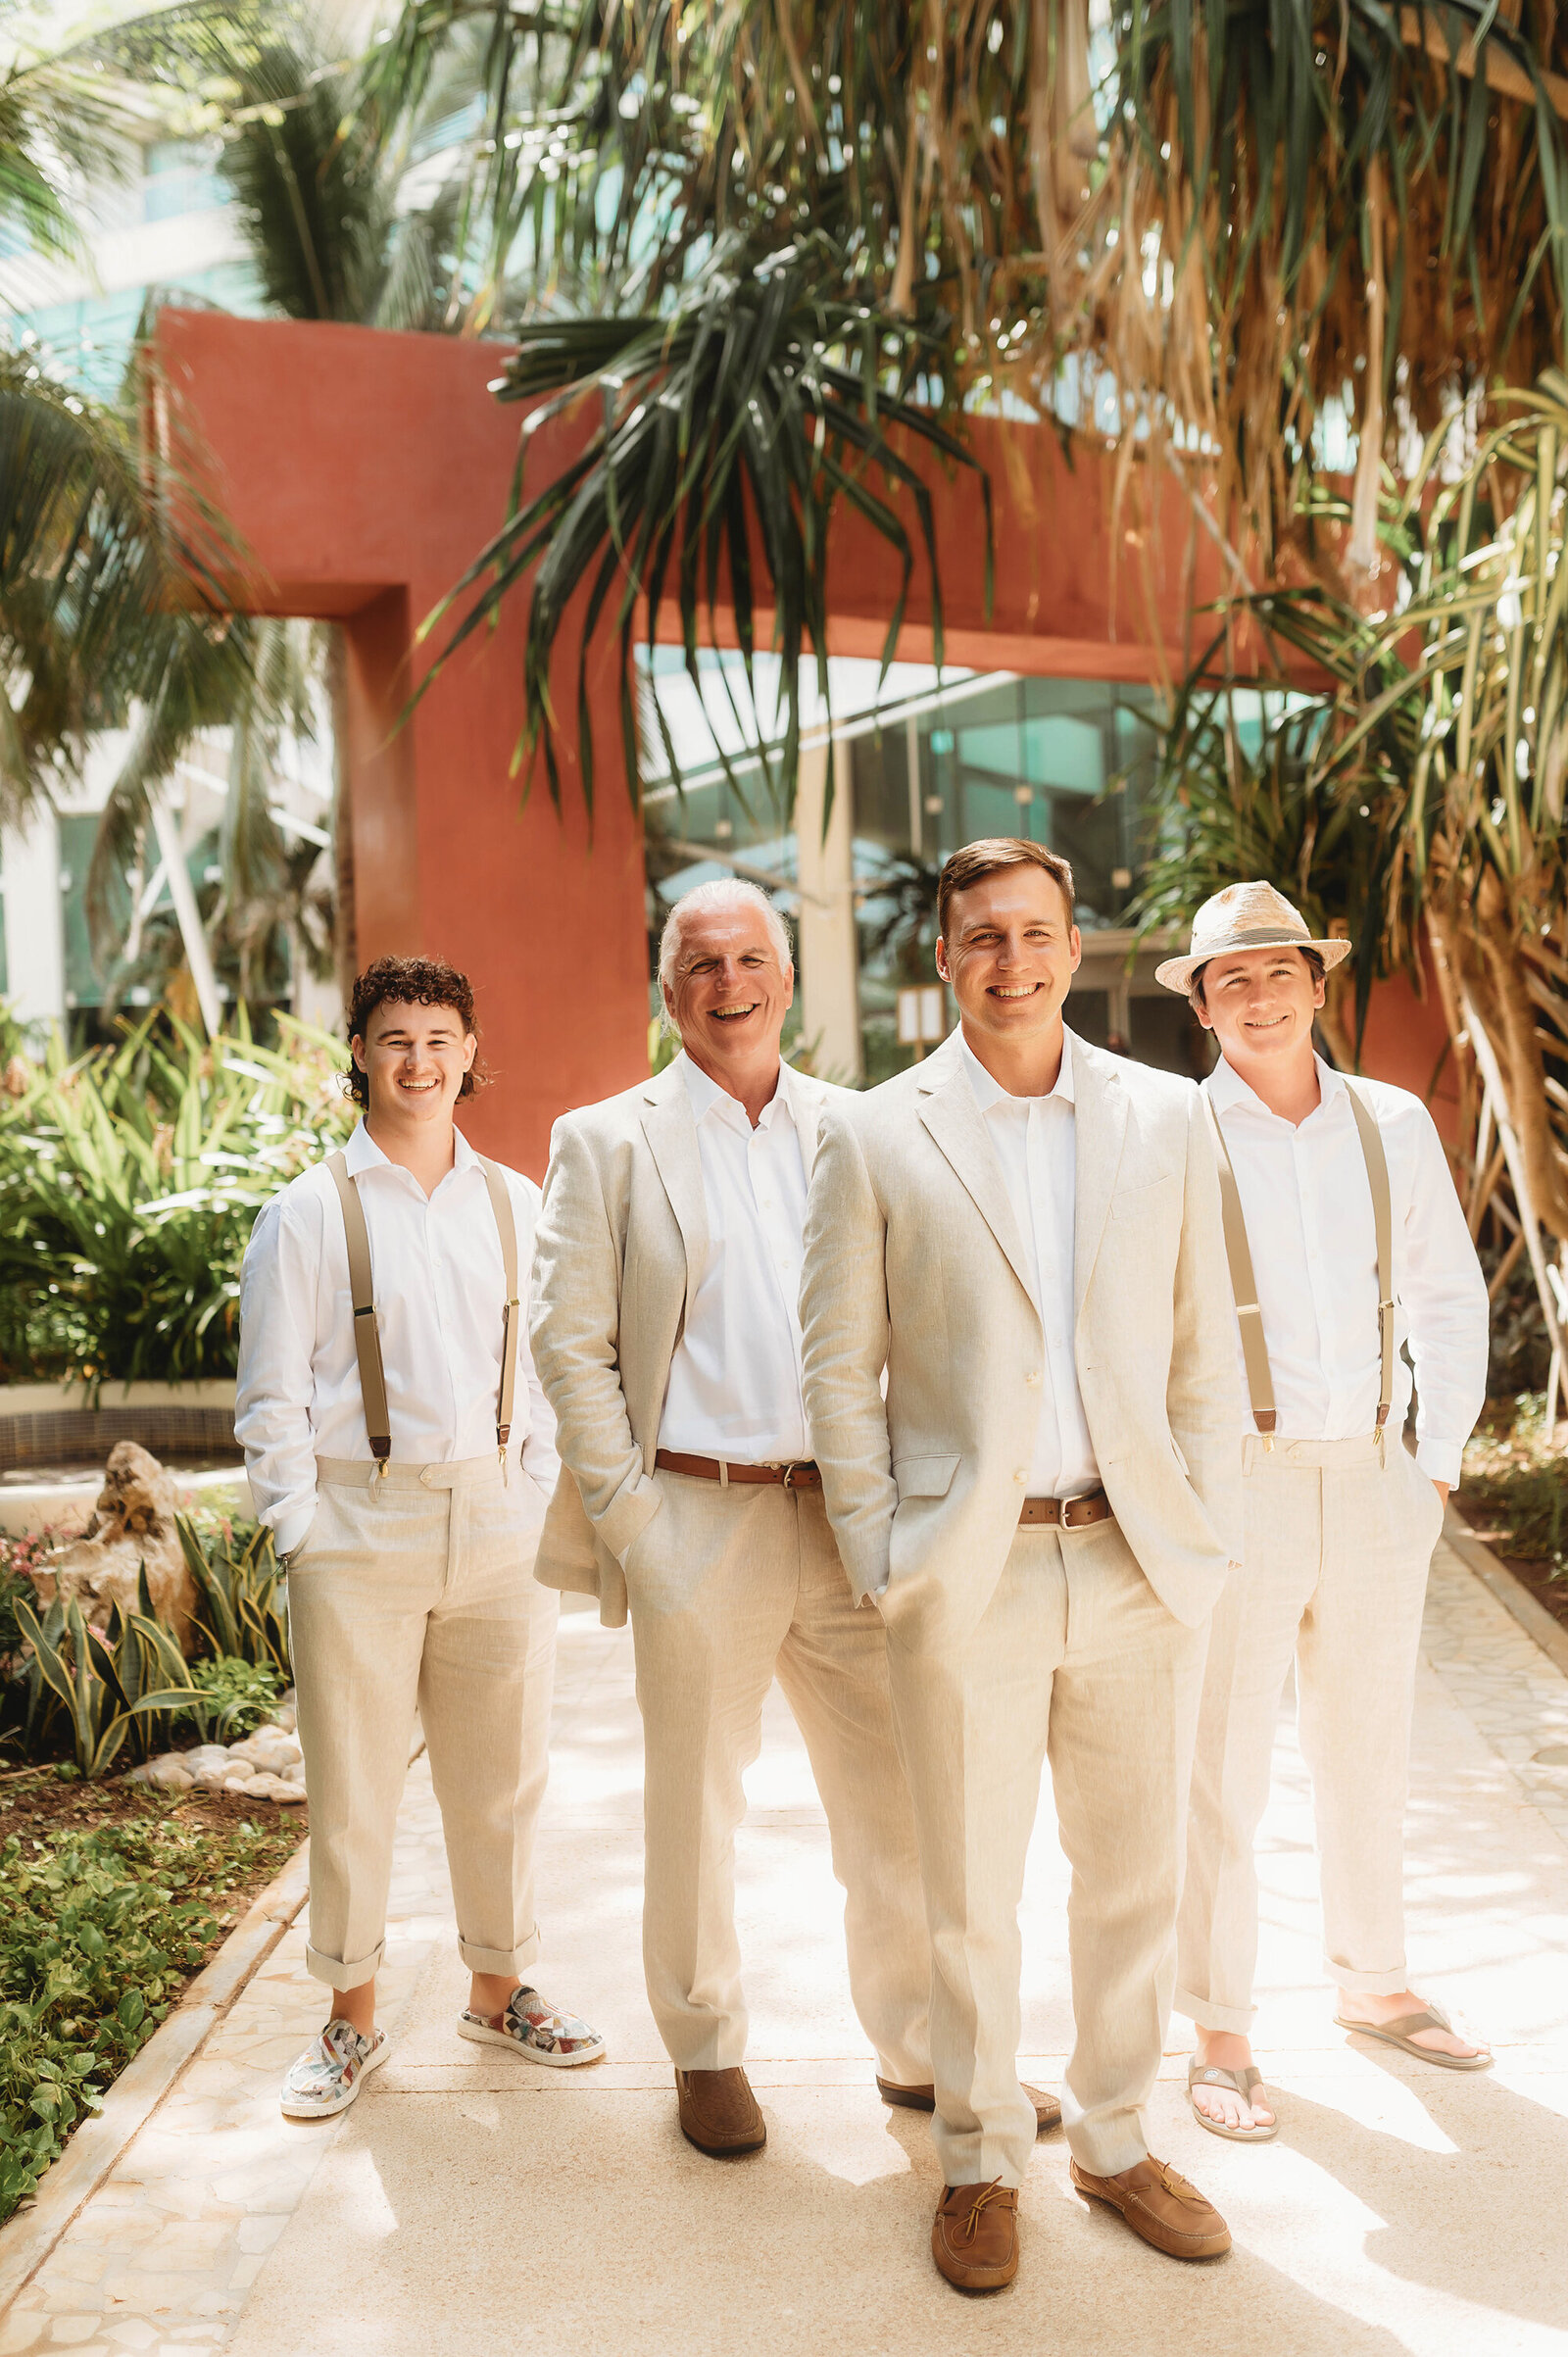 Groom with his groomsmen prior to Micro-Wedding Ceremony in Cancun Mexico.